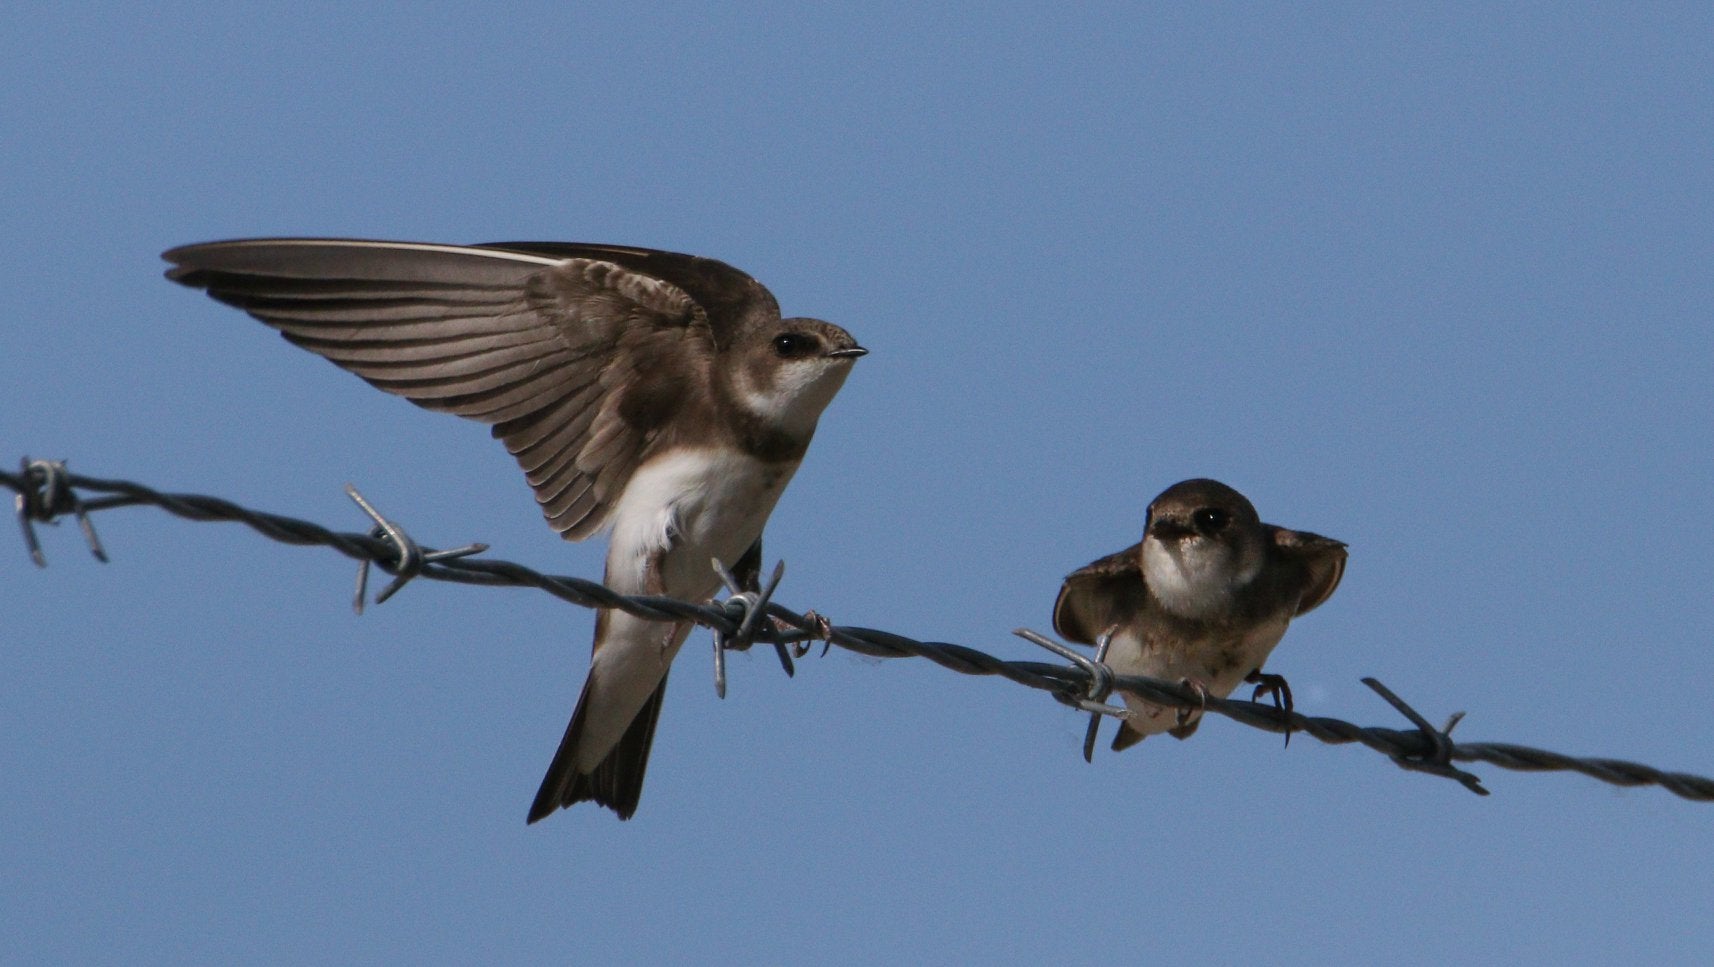 image shows 2 small brown and white birds on a barbed wire fence